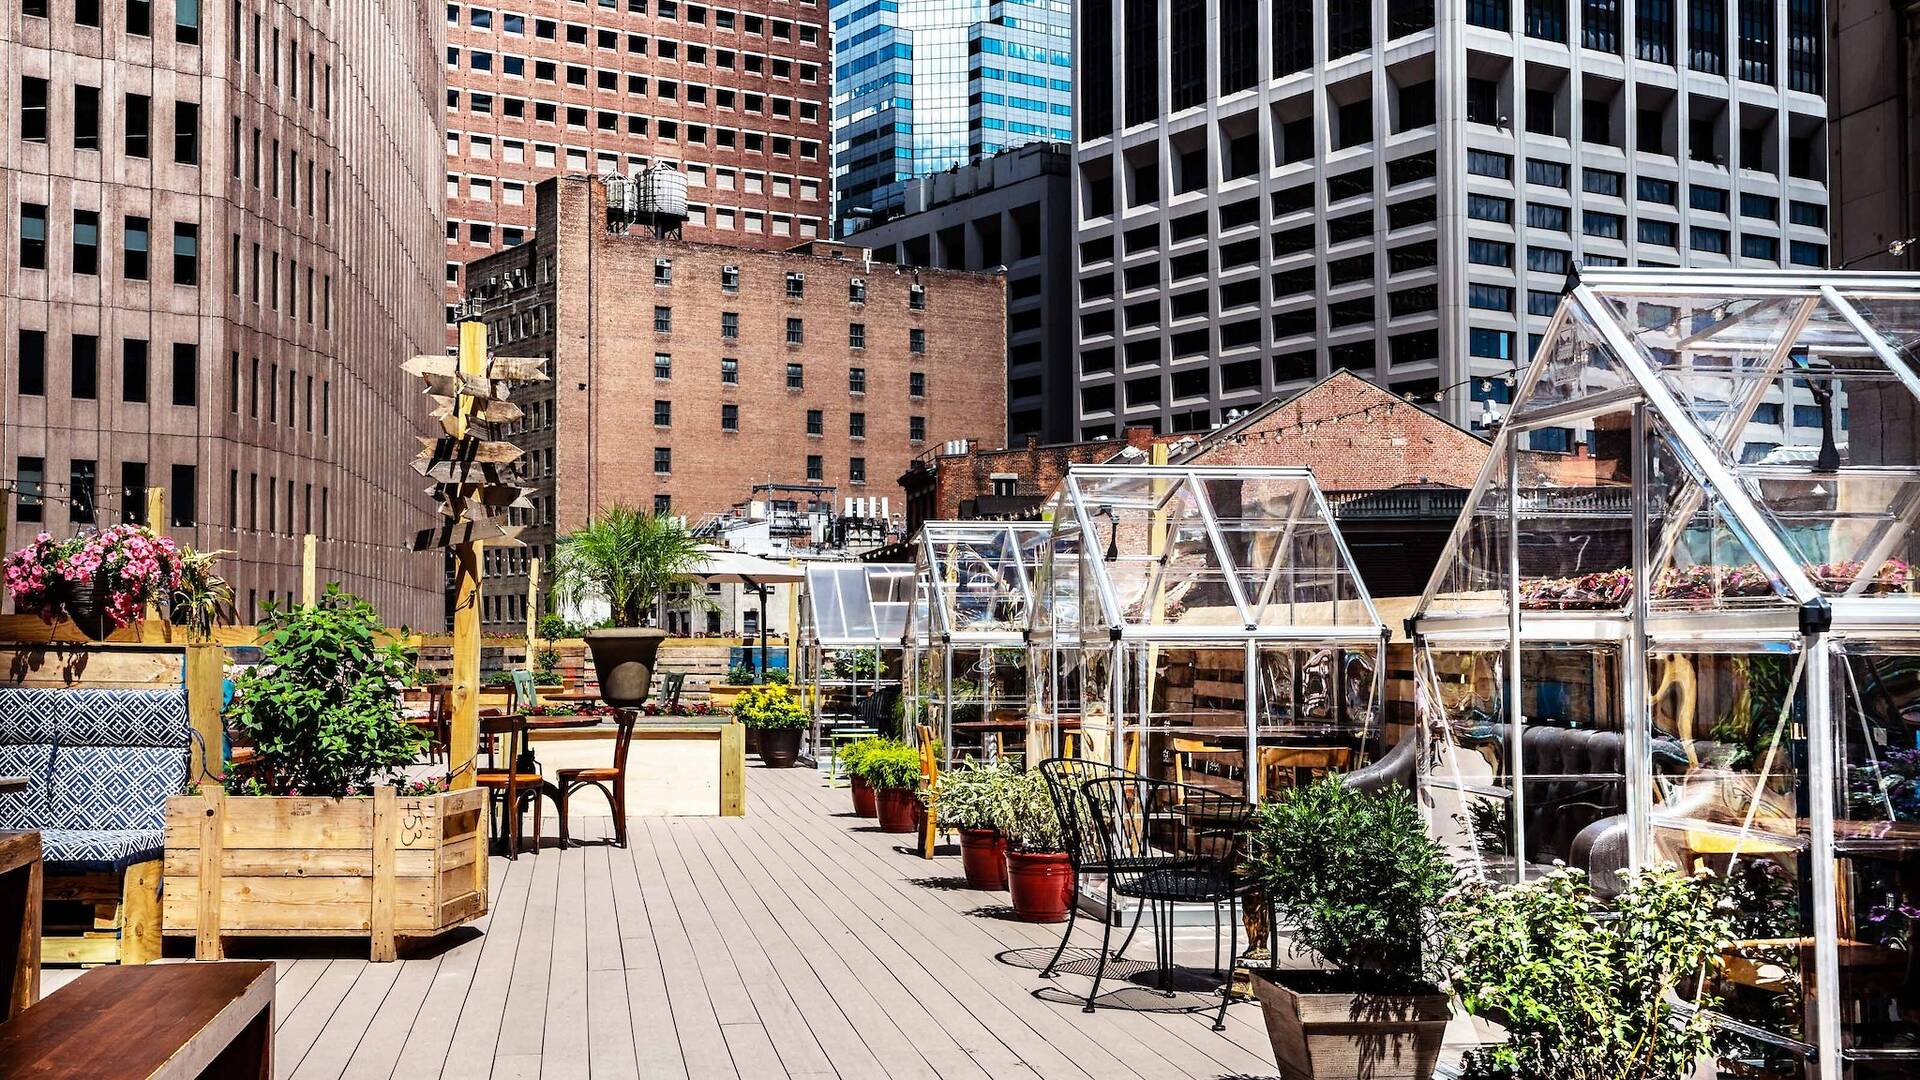 Dine in private greenhouses at this Manhattan rooftop restaurant